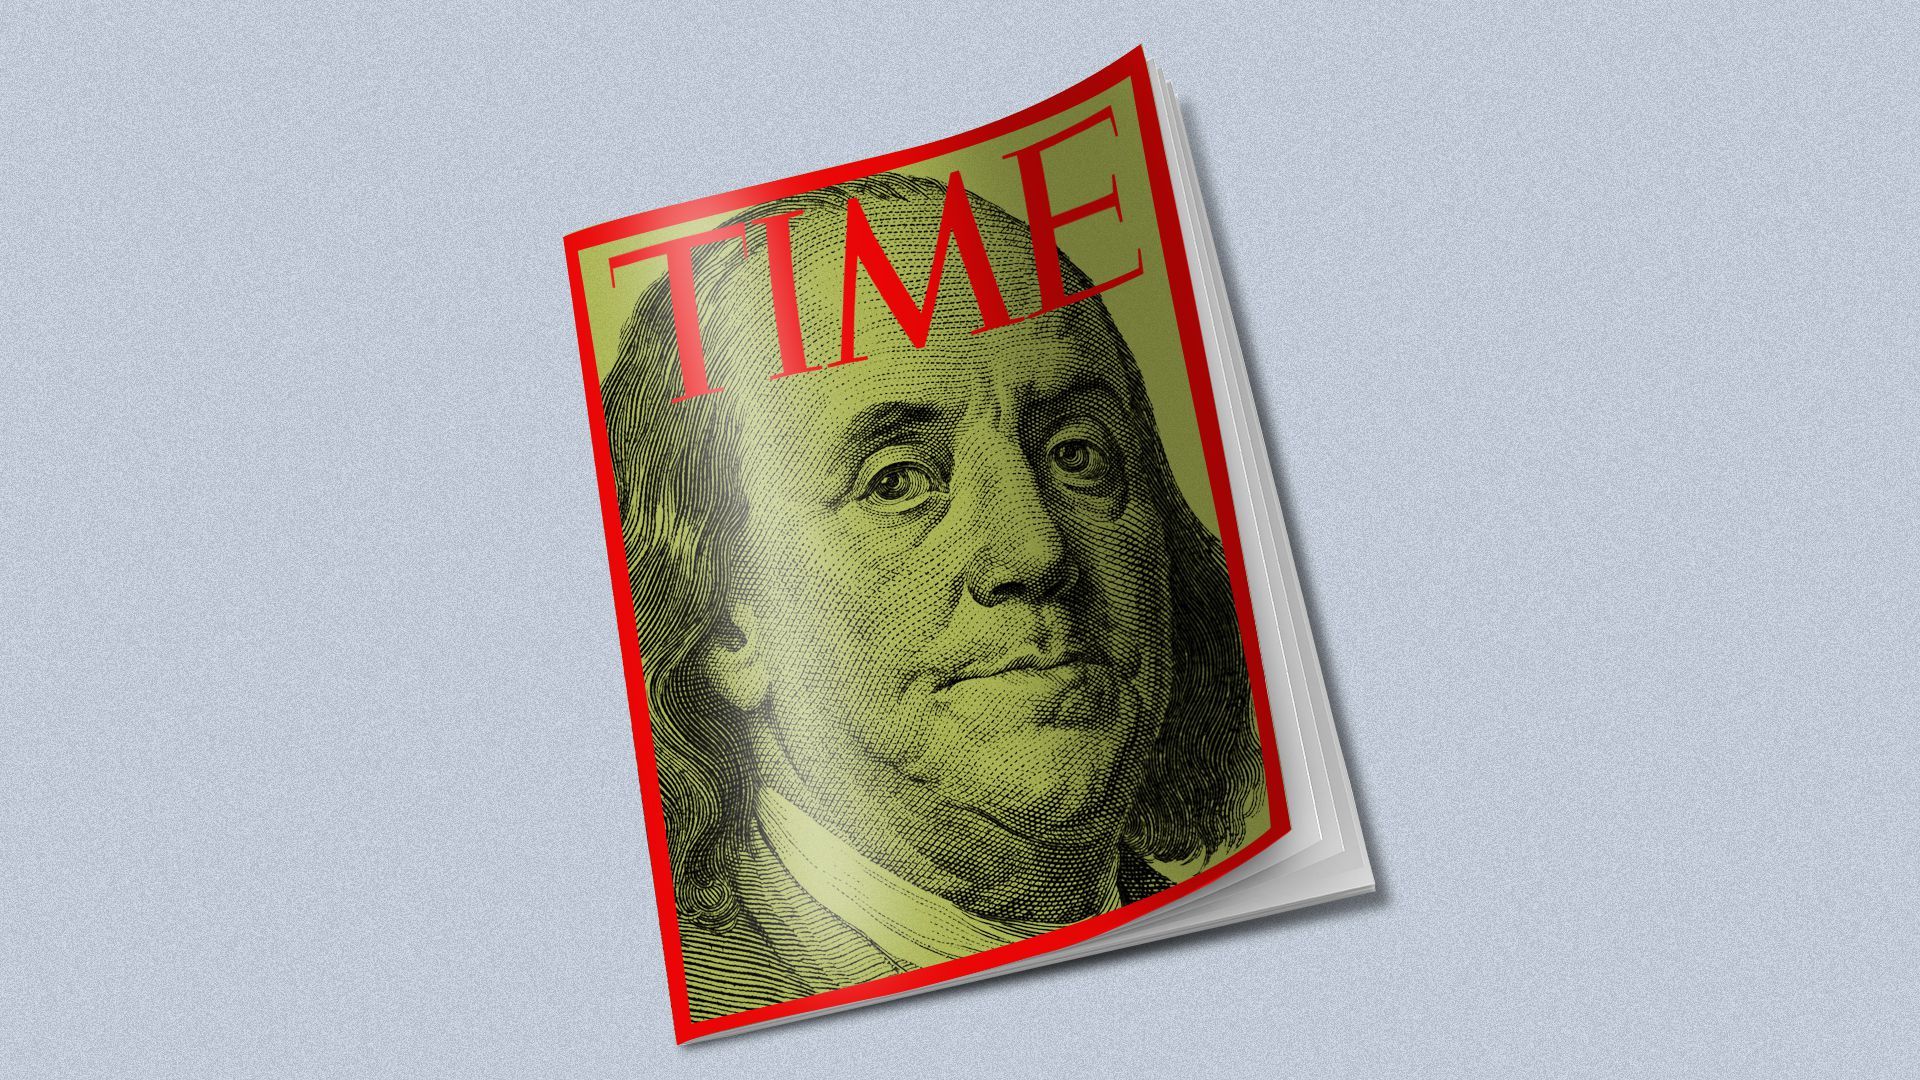 Illustration of Time Magazine with Benjamin Franklin from the hundred dollar bill on the cover.